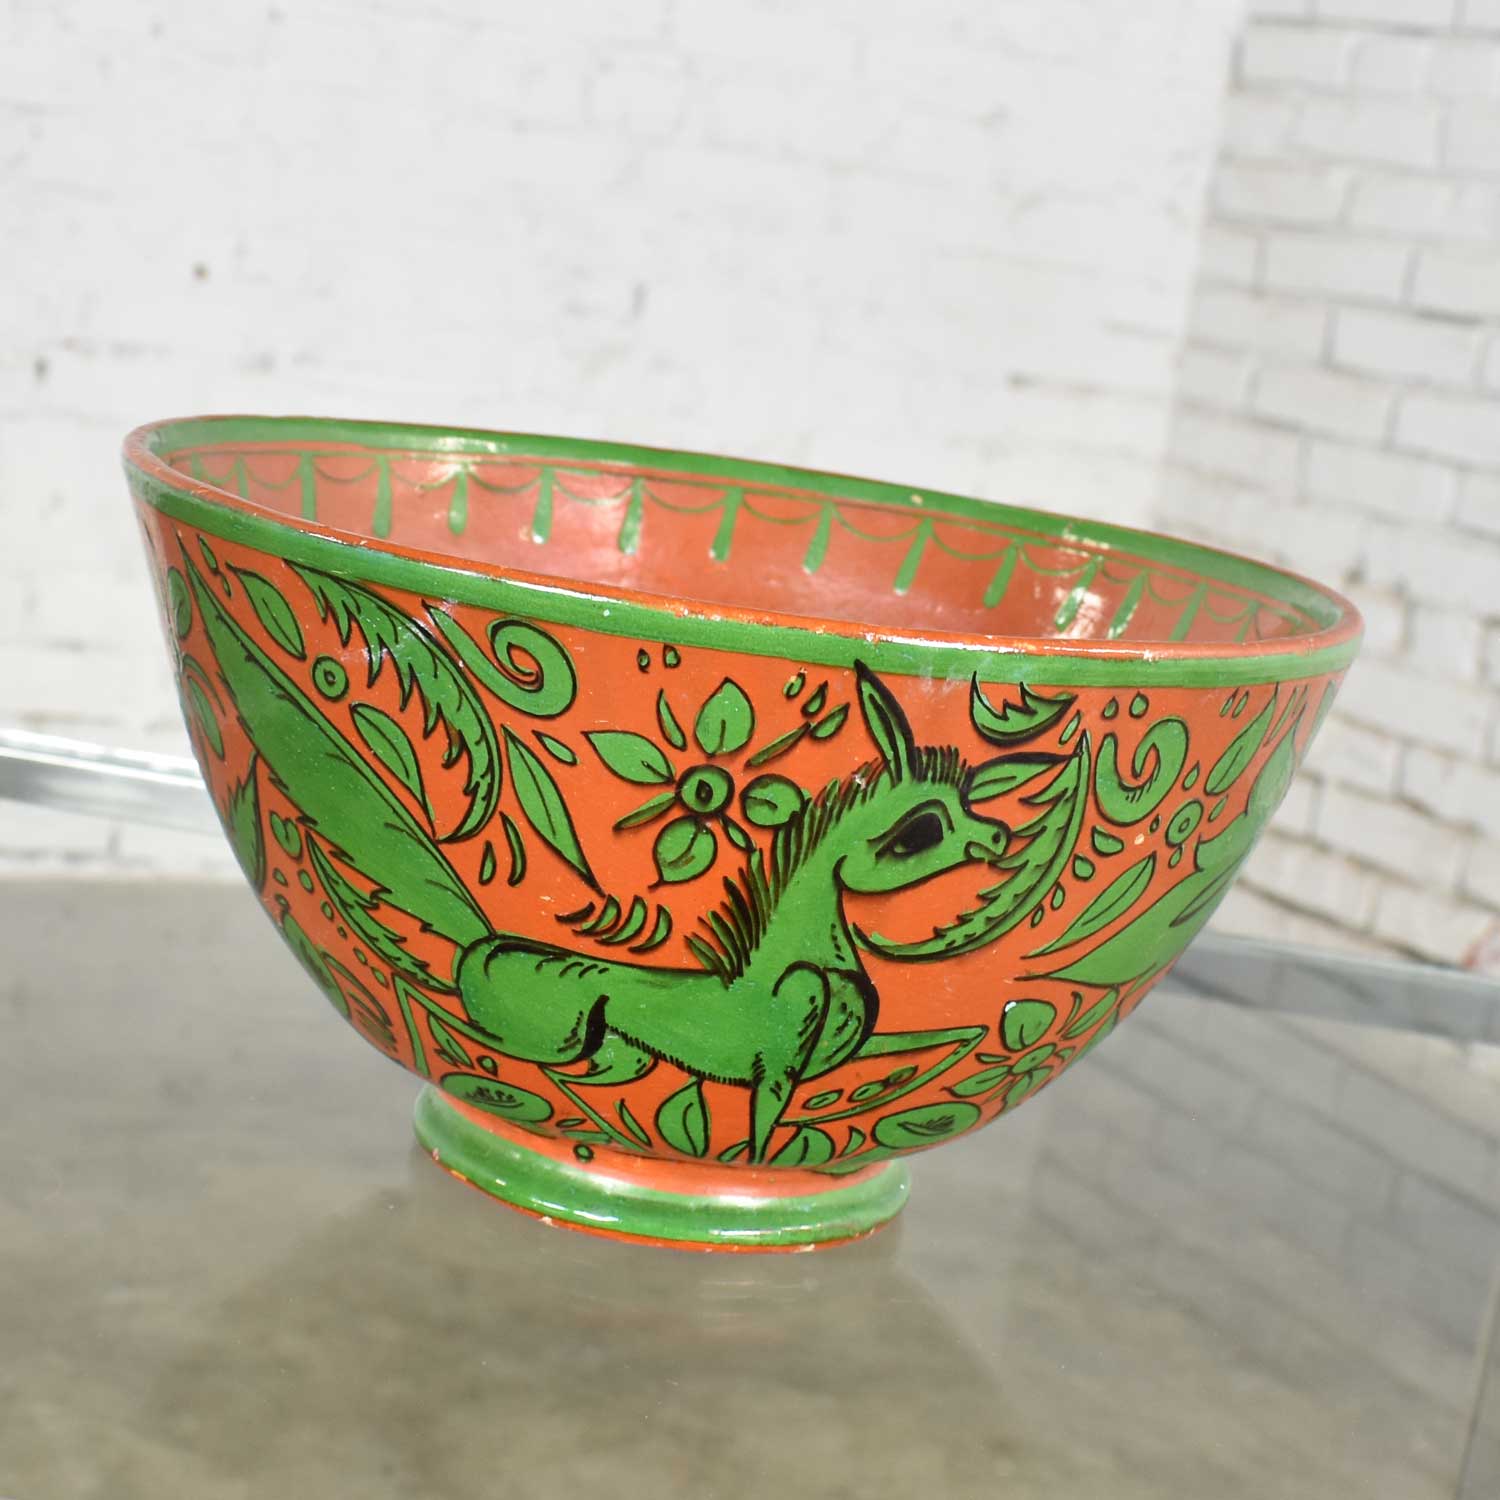 Tlaquepaque Mexican Pottery Bowl Large Fantasia Stylized Deer Green on Terracotta Mid-20th Century